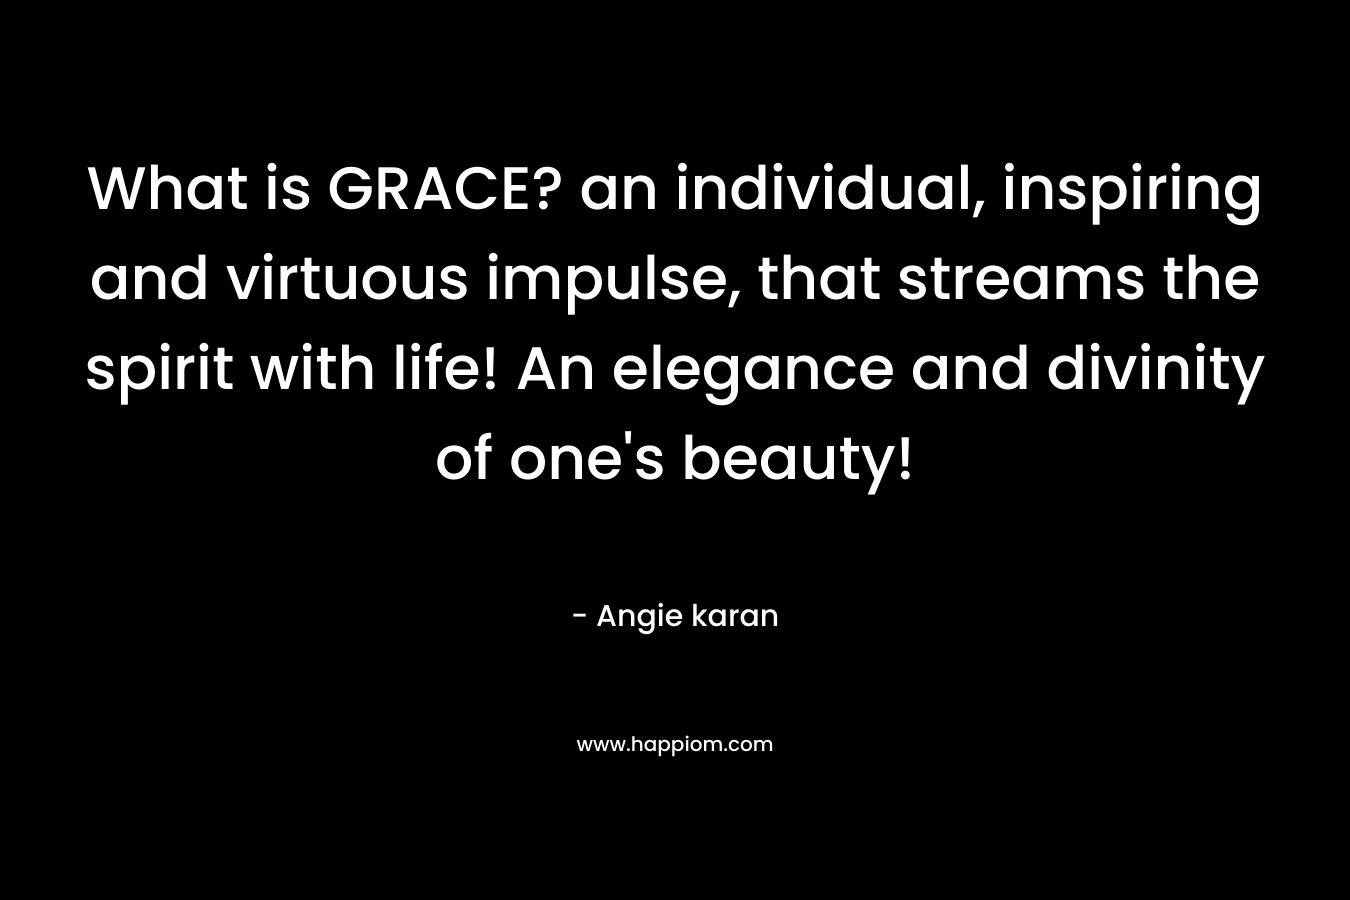 What is GRACE? an individual, inspiring and virtuous impulse, that streams the spirit with life! An elegance and divinity of one's beauty!